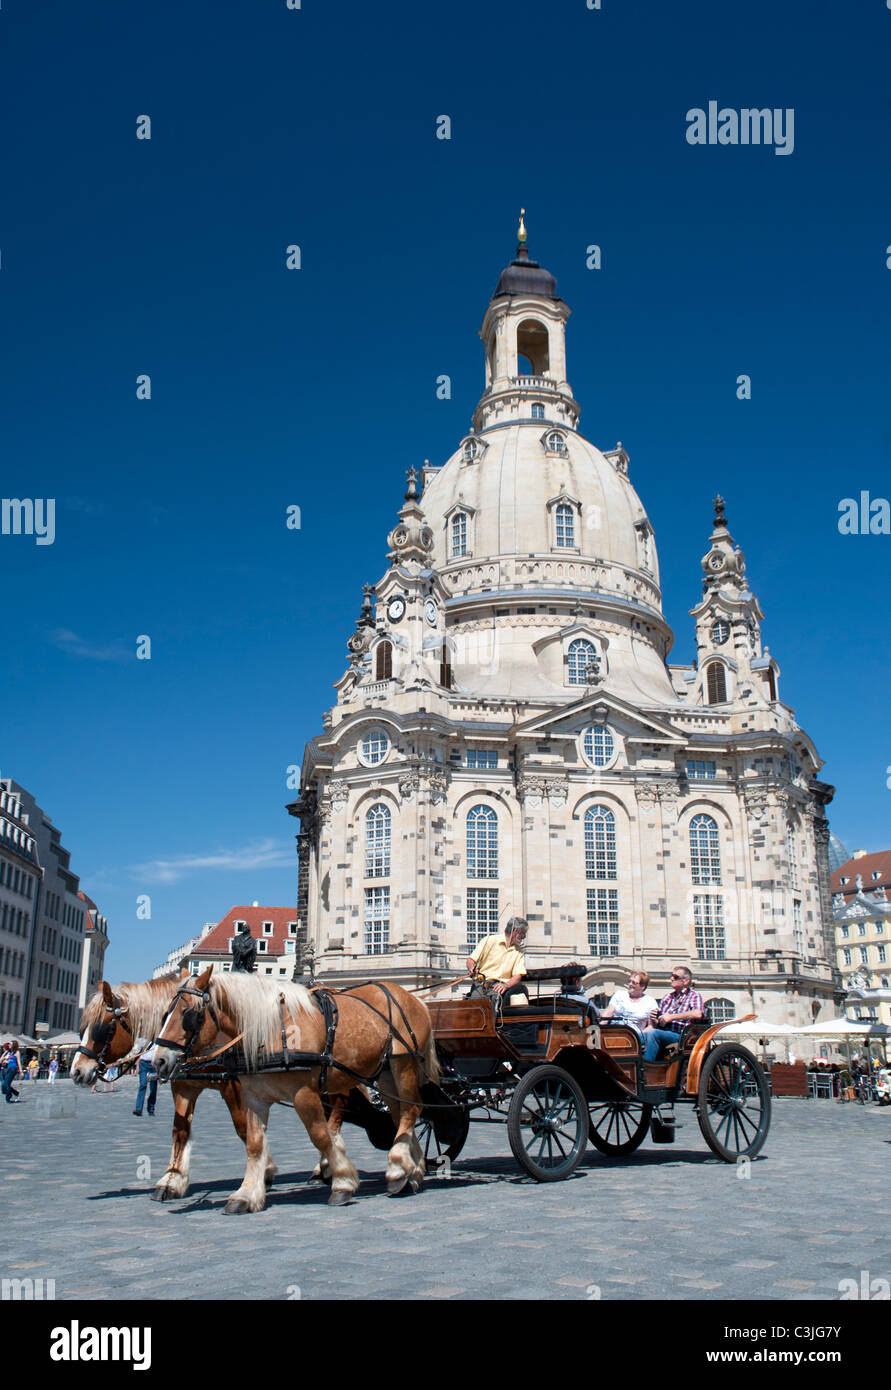 Exterior of famous Frauenkirche (Church Of Our Lady) church in Dresden Saxony Germany Stock Photo